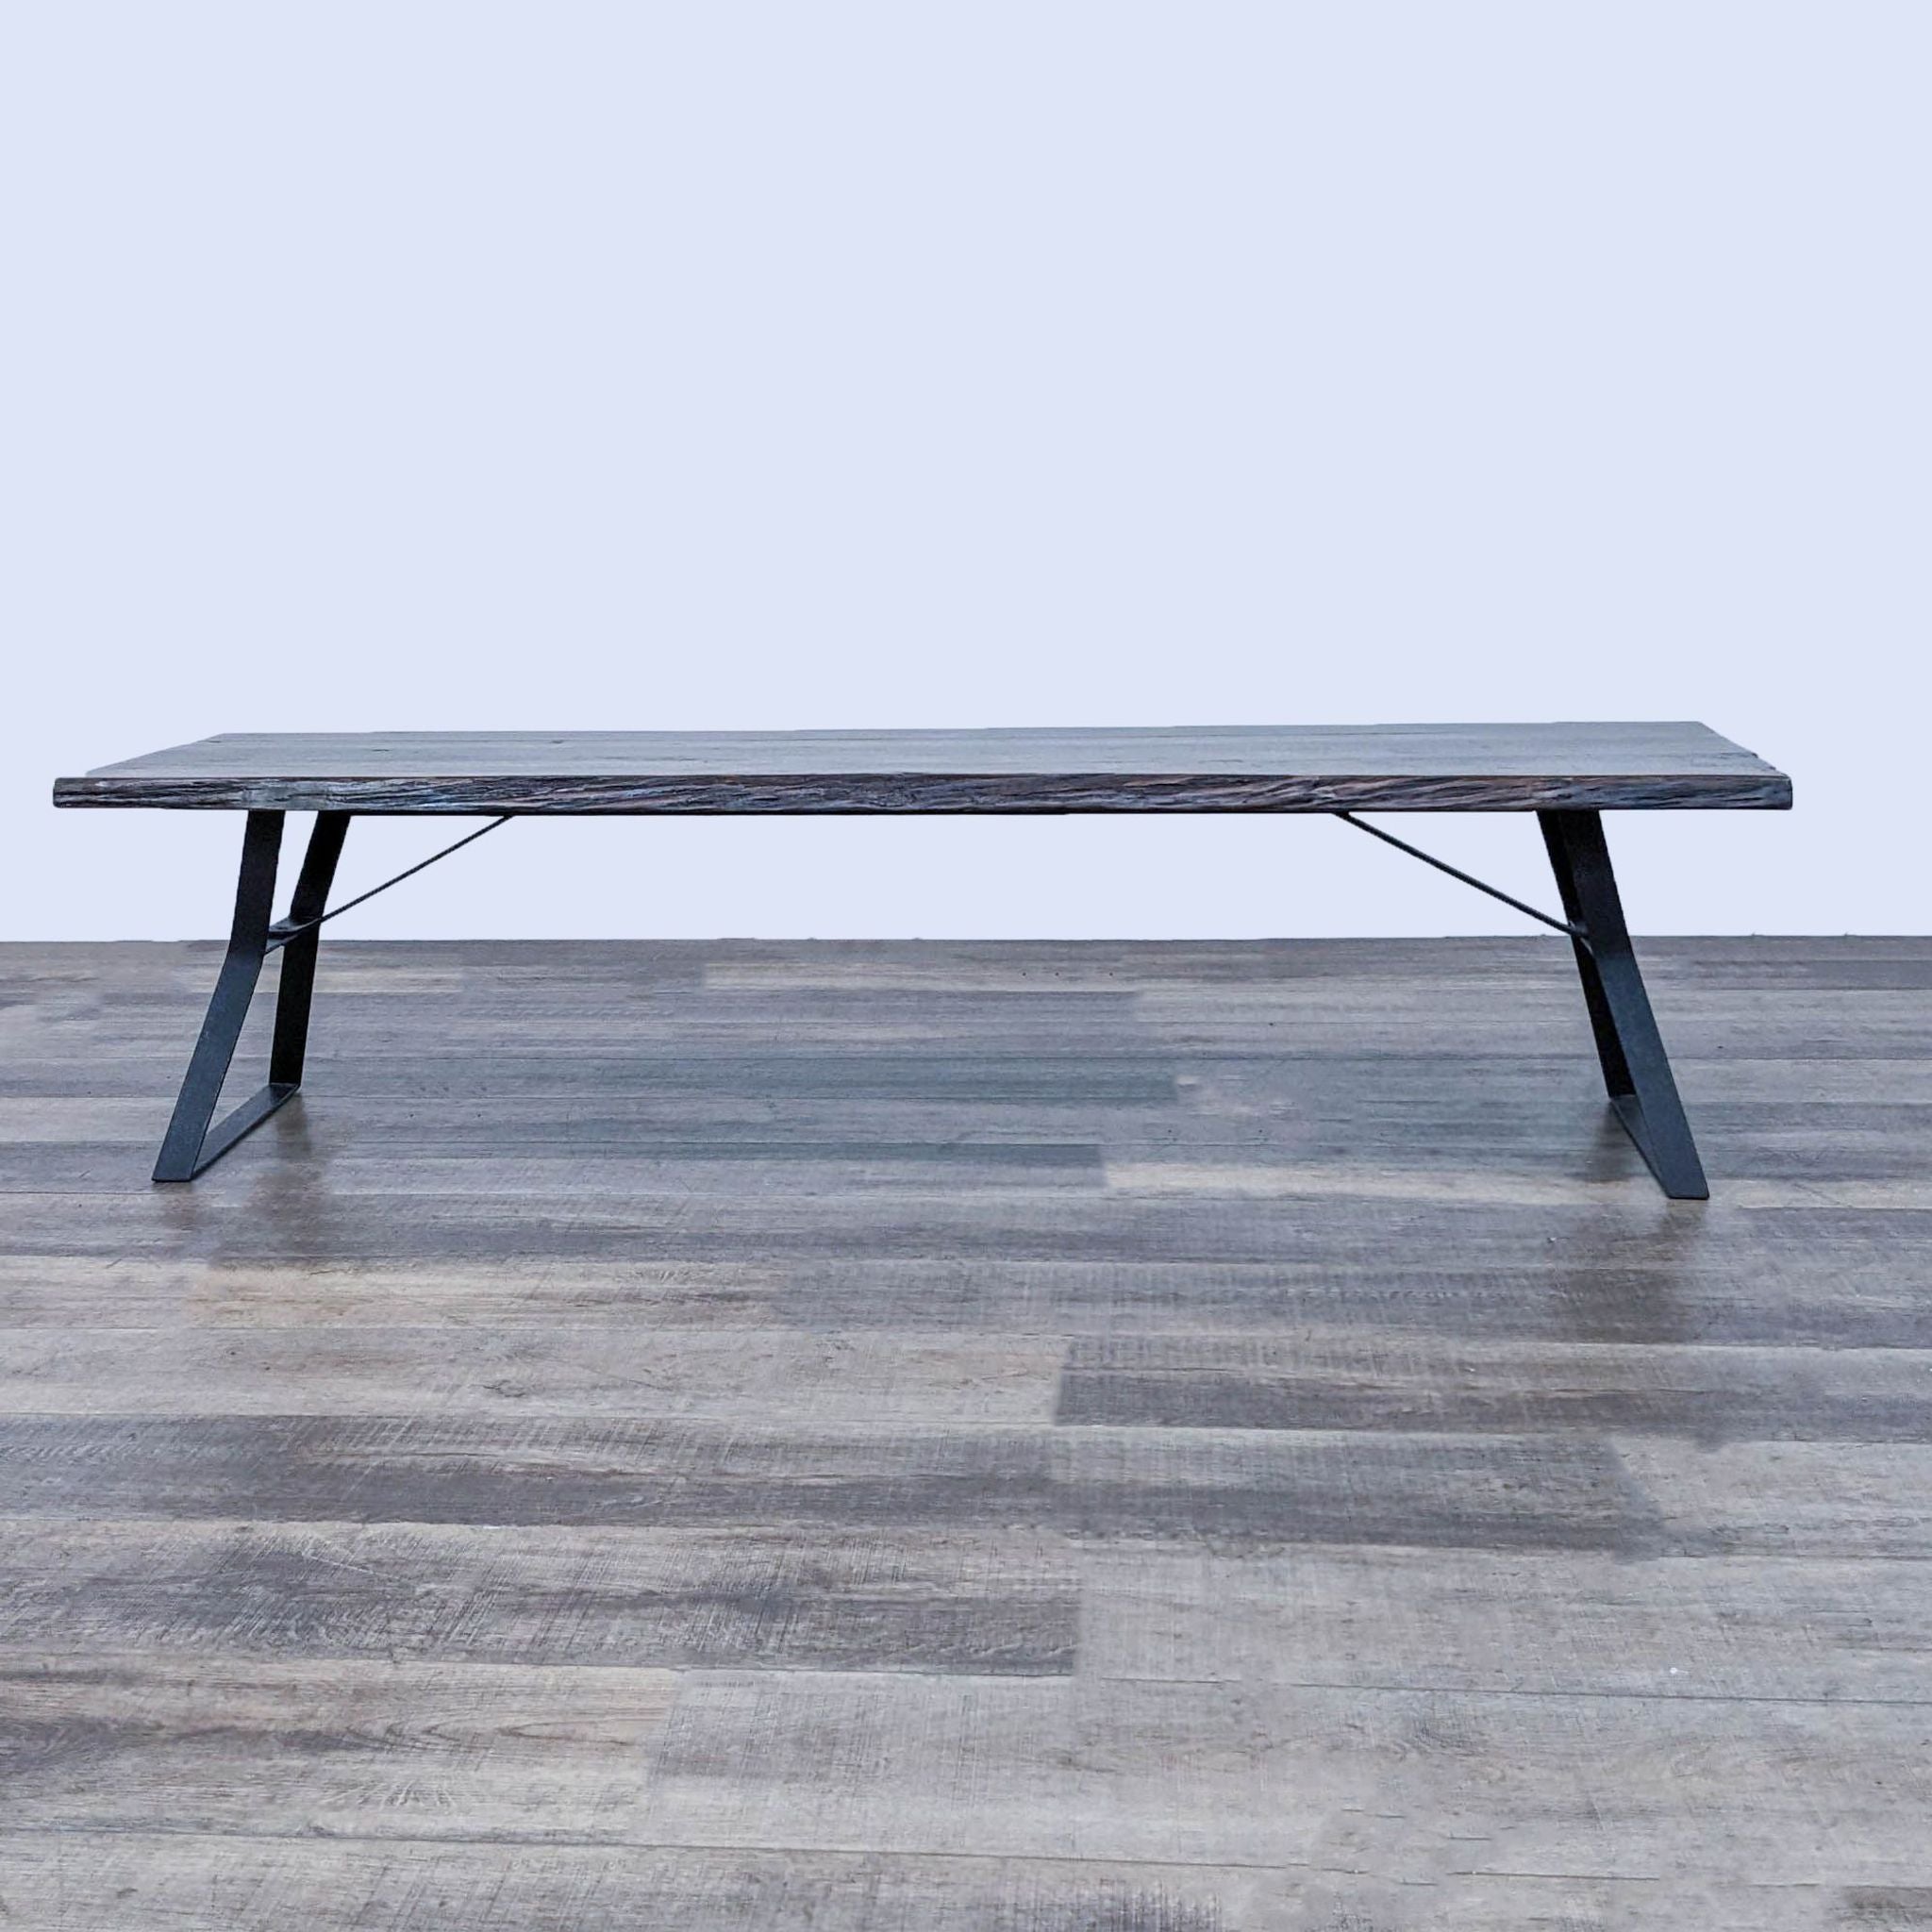 Reperch brand coffee table with metal base and dark wooden top on a wooden floor.